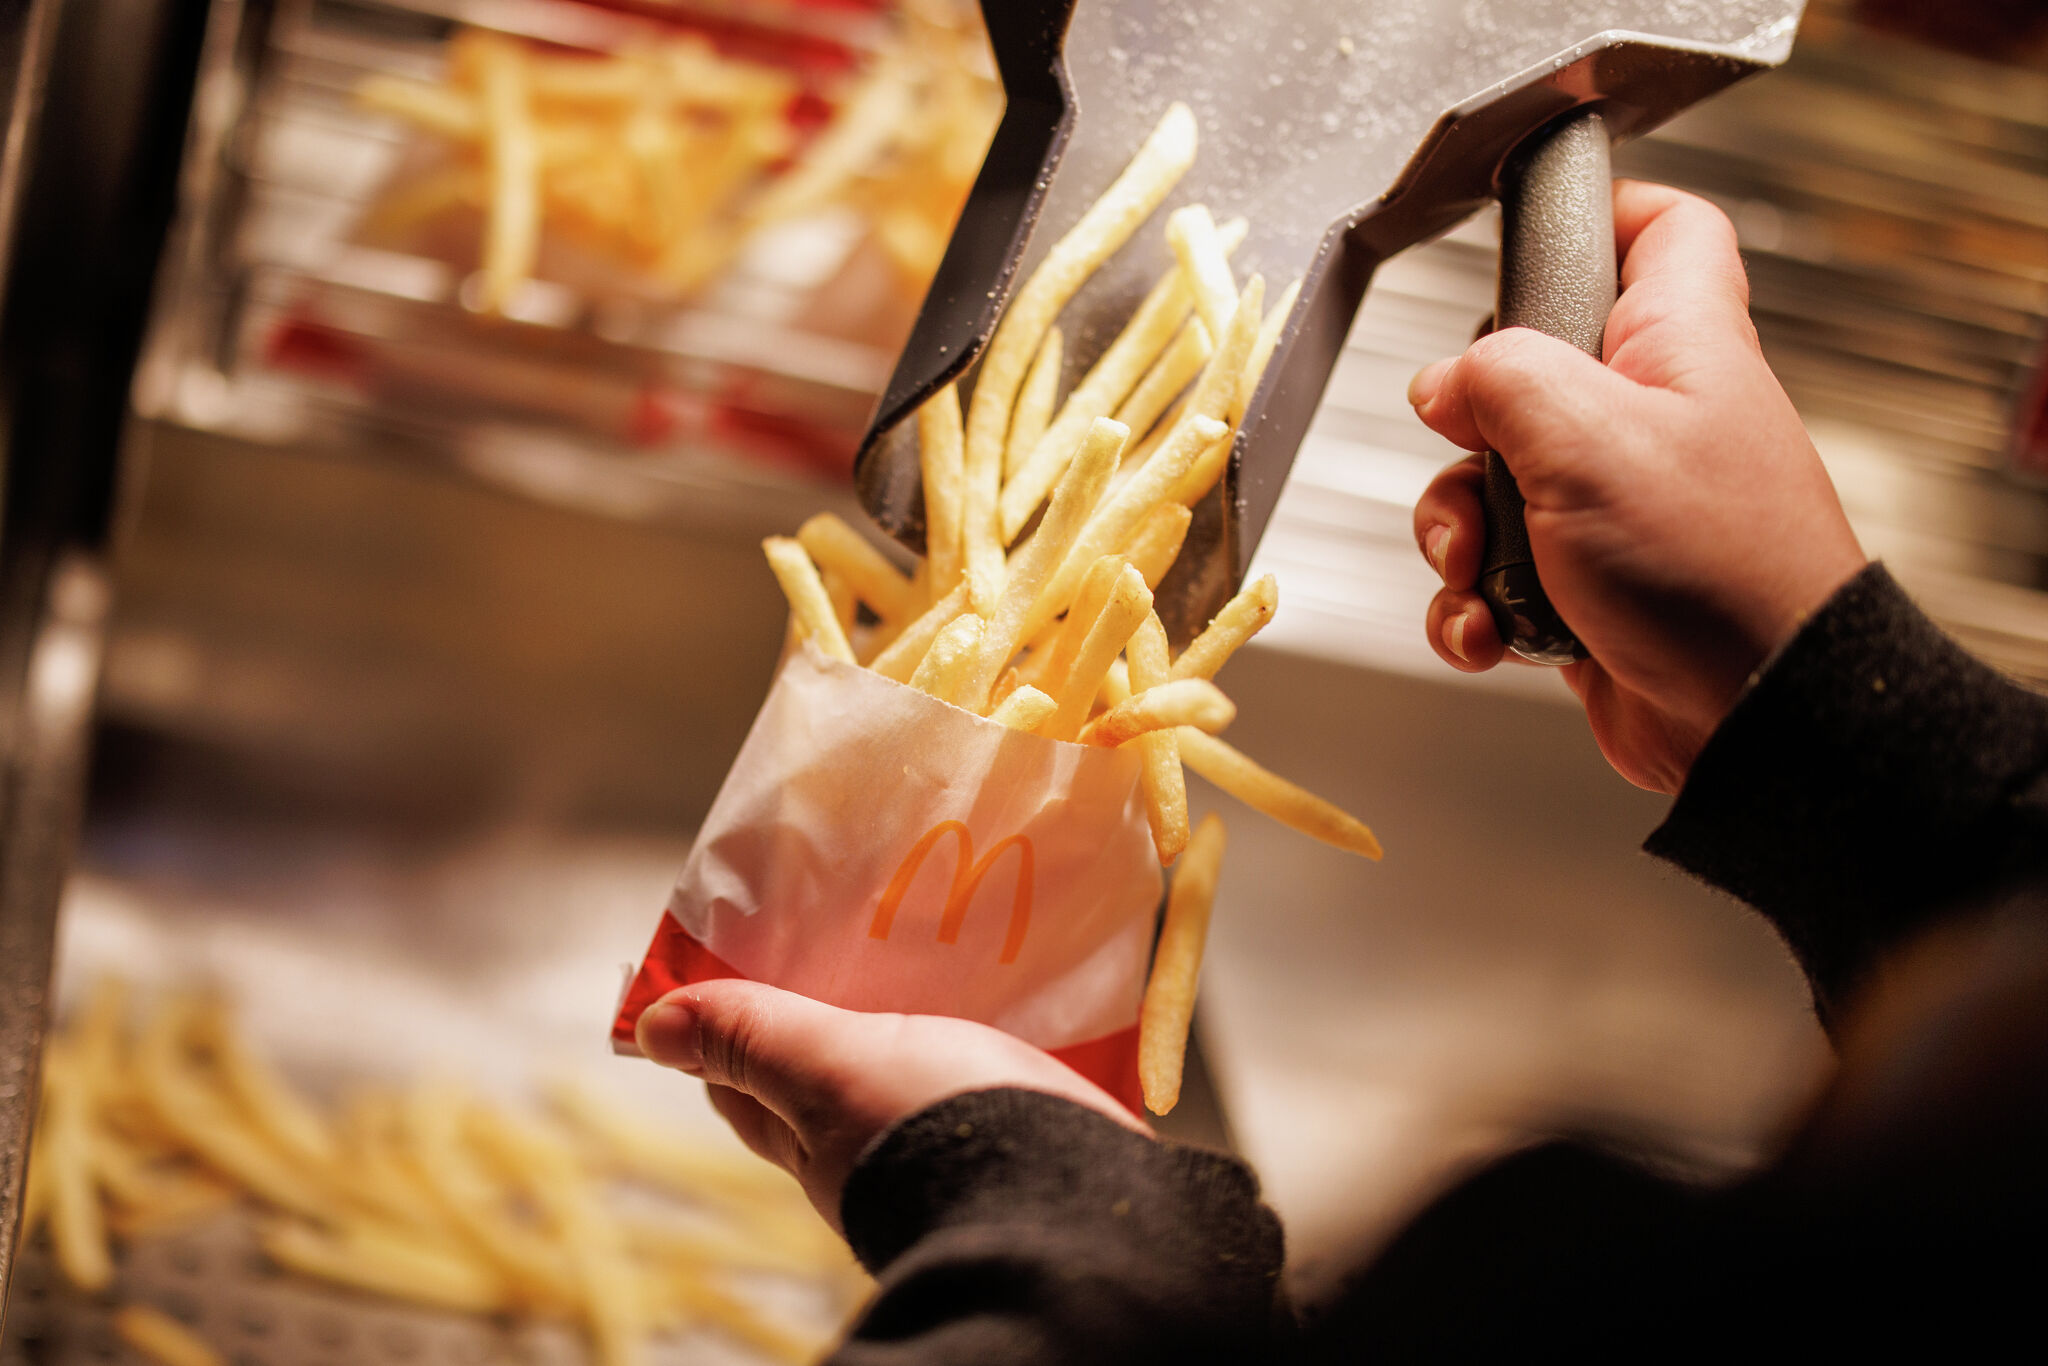 Essentially the most-missed Disneyland meals is the McDonald’s fry wagon